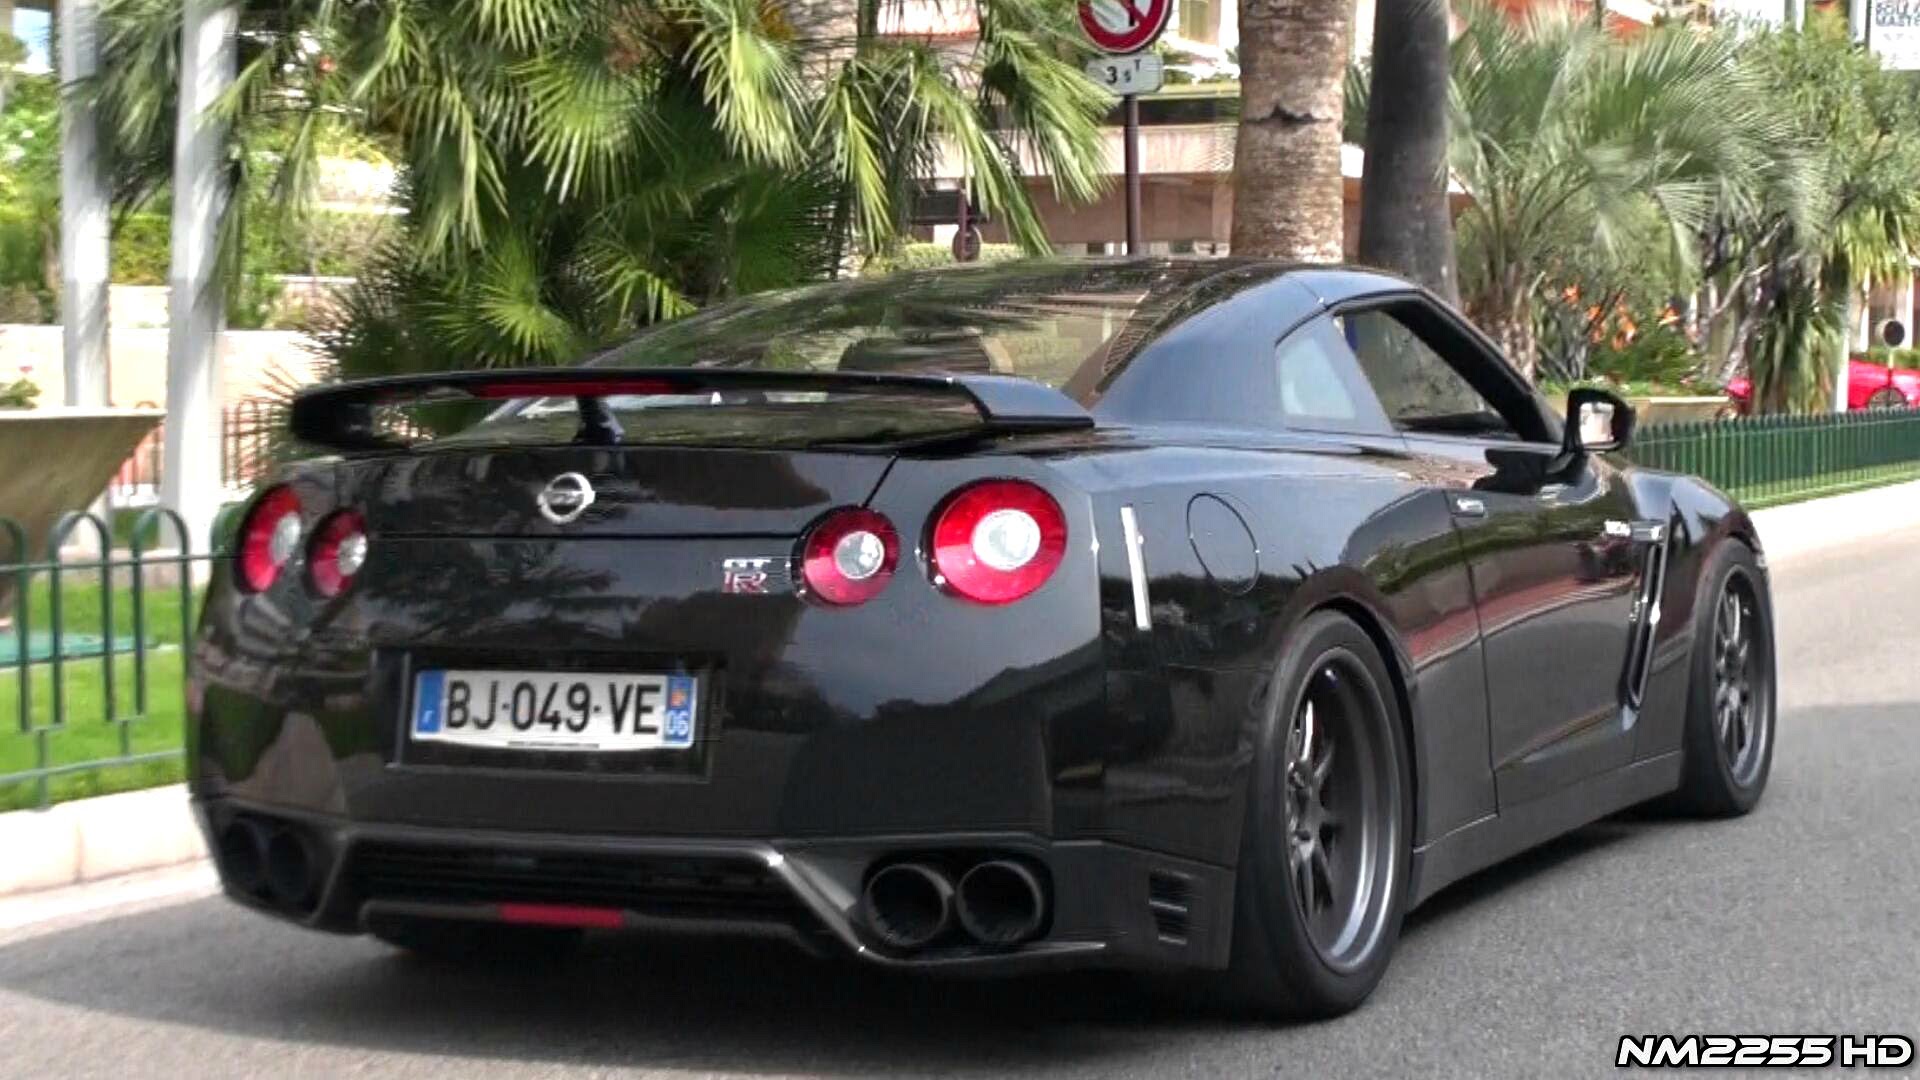 R35 Pictures